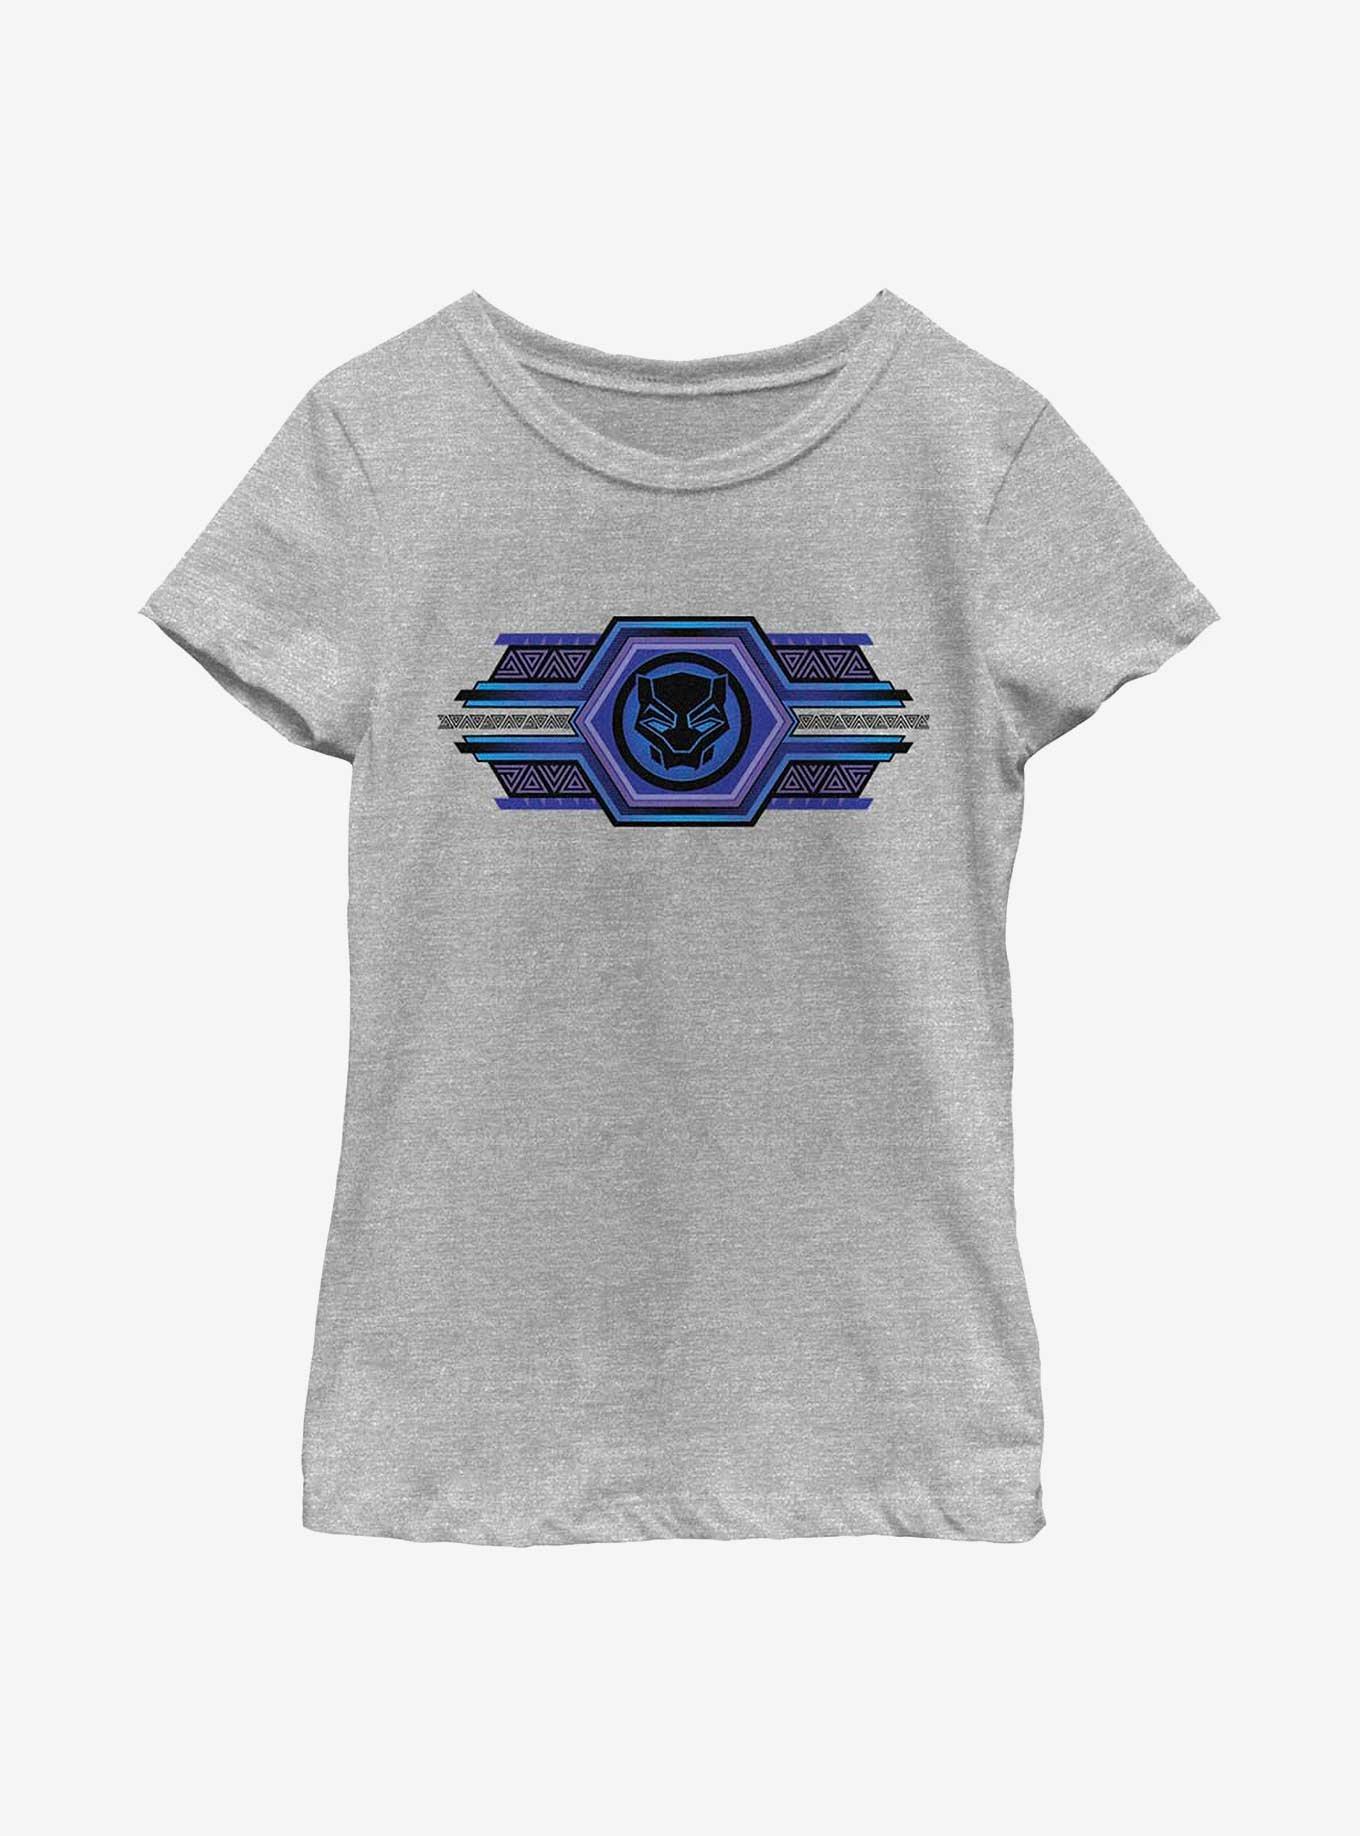 Marvel Black Panther: Wakanda Forever Sigil Hexes Youth Girls T-Shirt, ATH HTR, hi-res